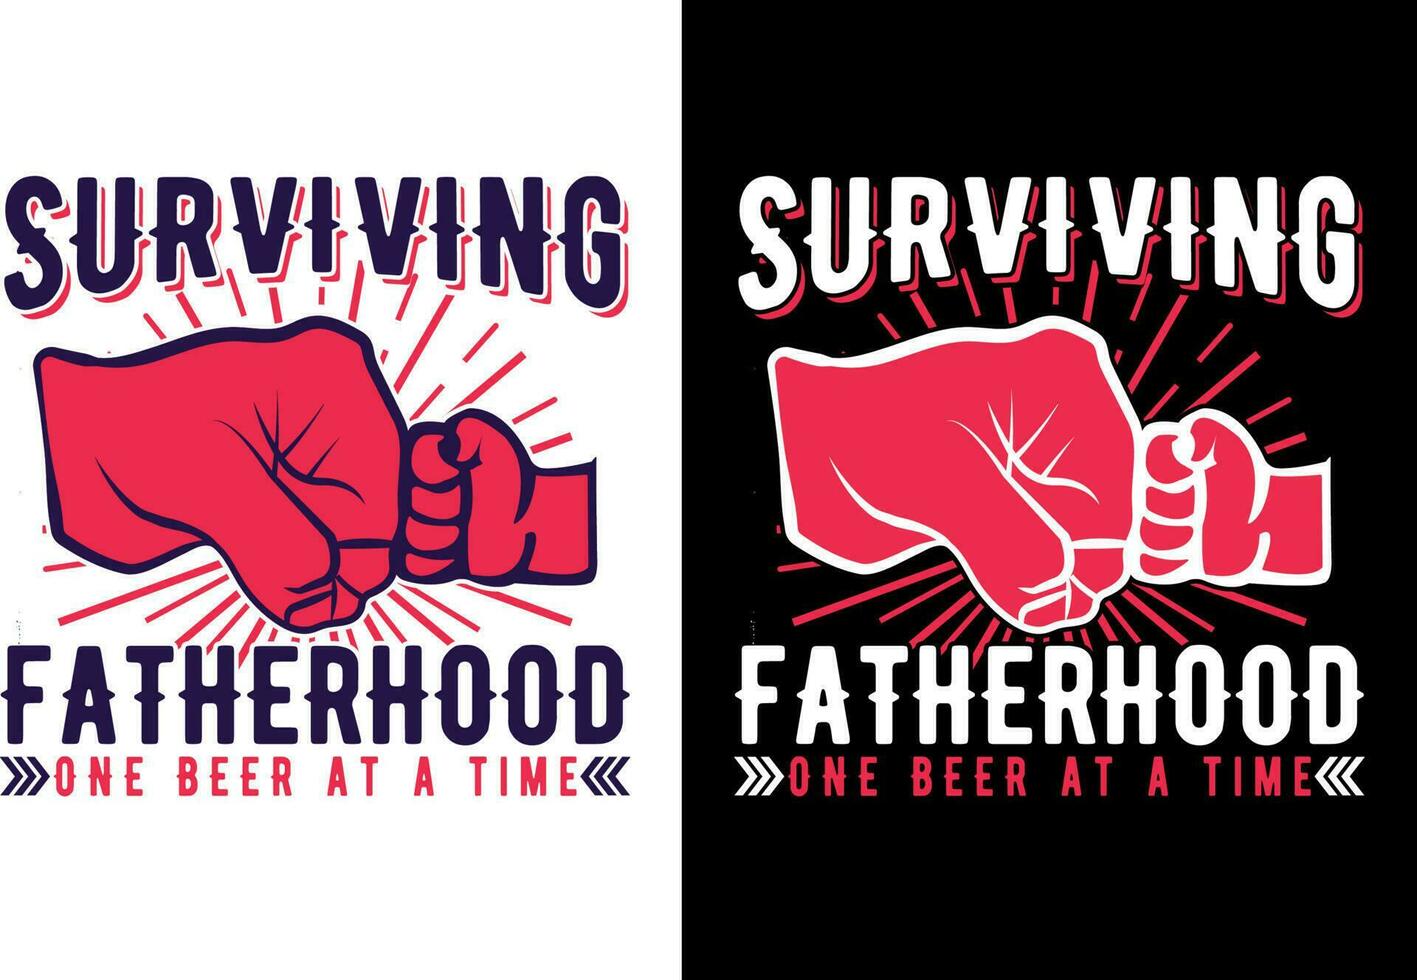 Father's day typography quote t shirt design vector